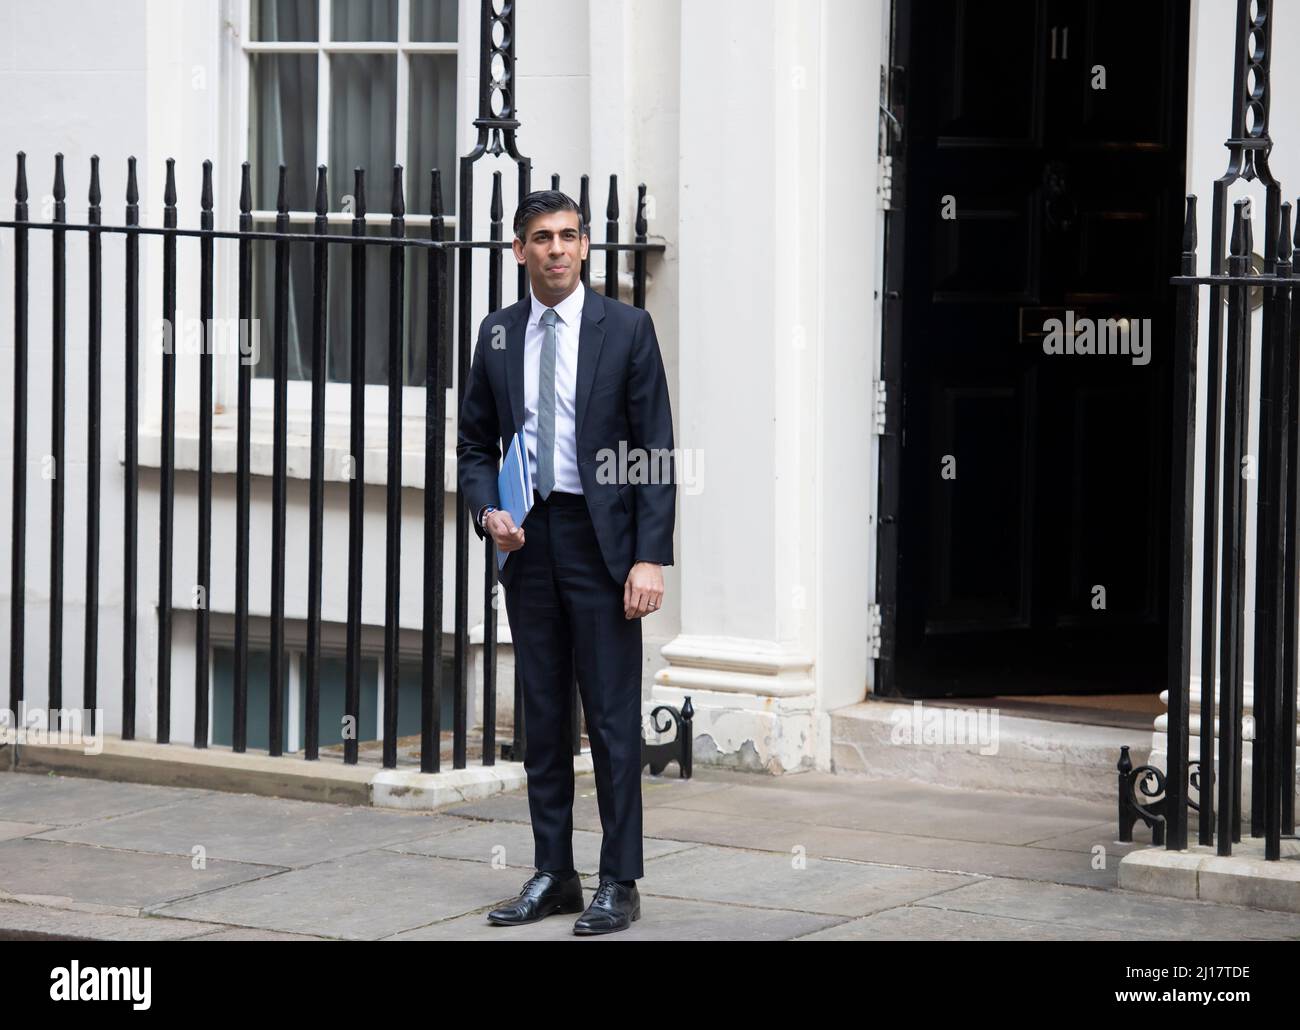 11 Downing Street, London, UK. 23 March 2022. Rishi Sunak MP, Chancellor of the Exchequer, leaving 11 Downing Street before giving his Spring Statement to Parliament. Credit: Malcolm Park/Alamy Live News. Stock Photo